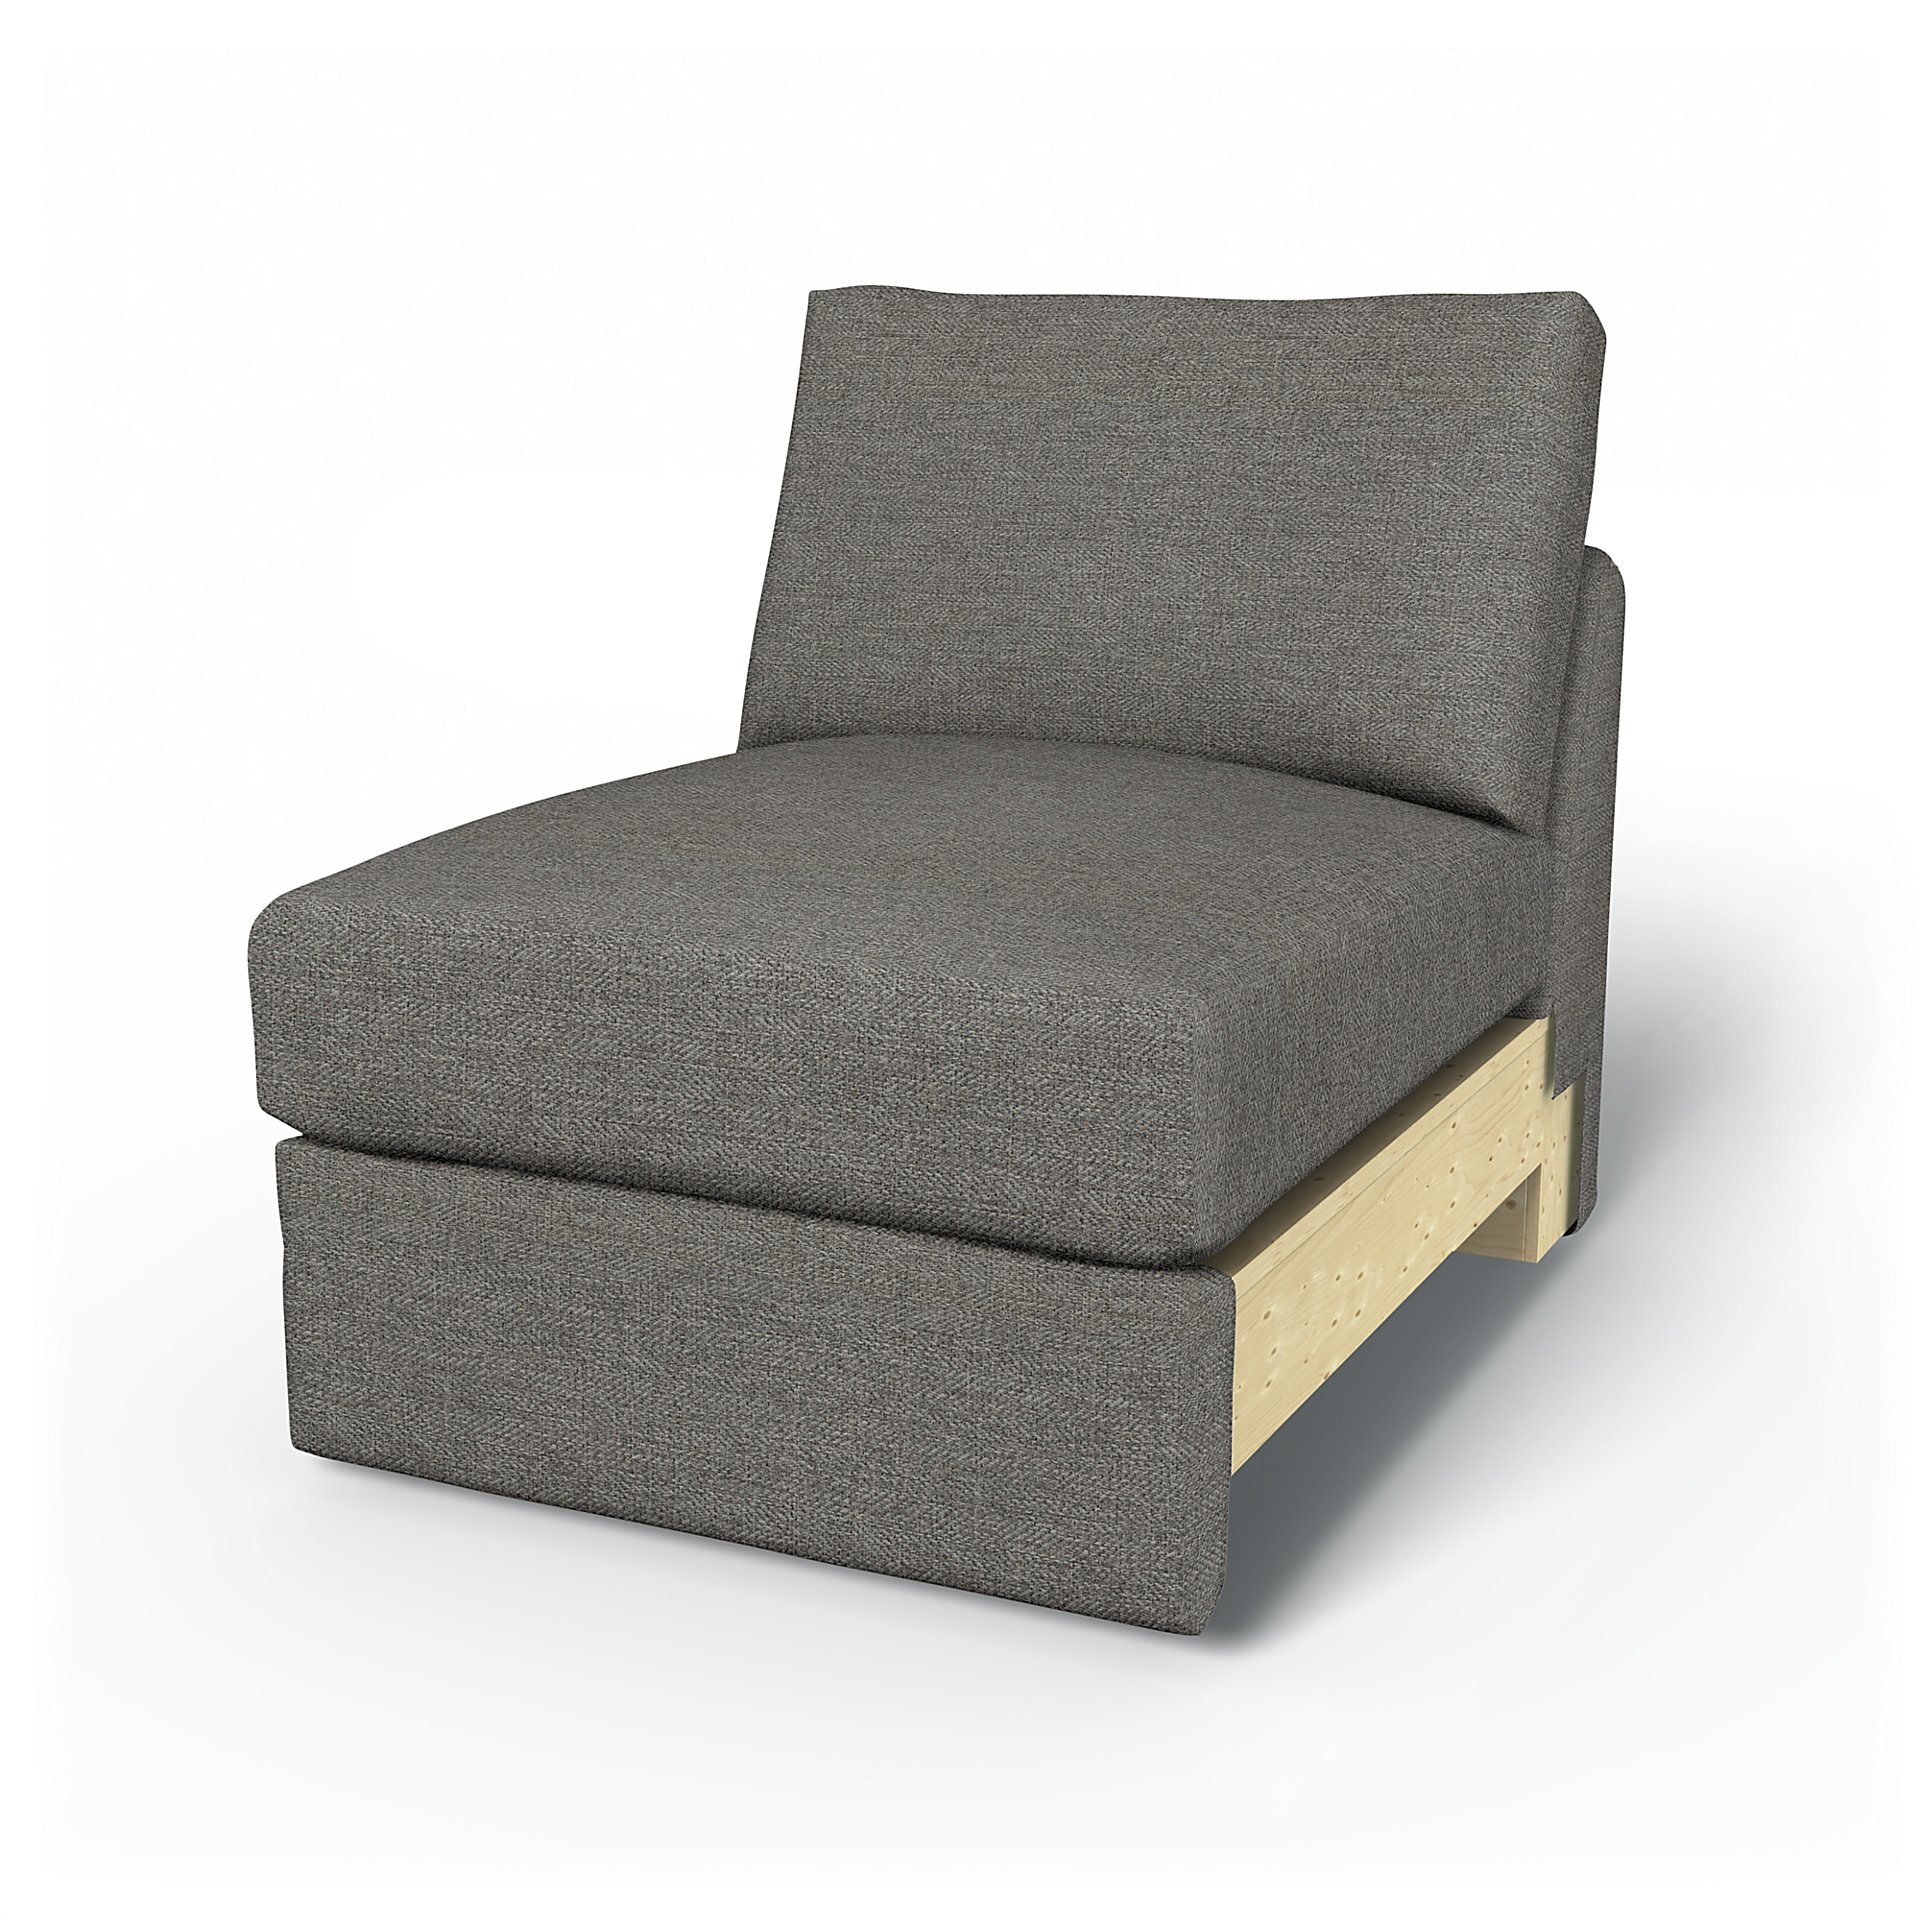 IKEA - Vimle 1 Seat Section Cover, Taupe, Boucle & Texture - Bemz